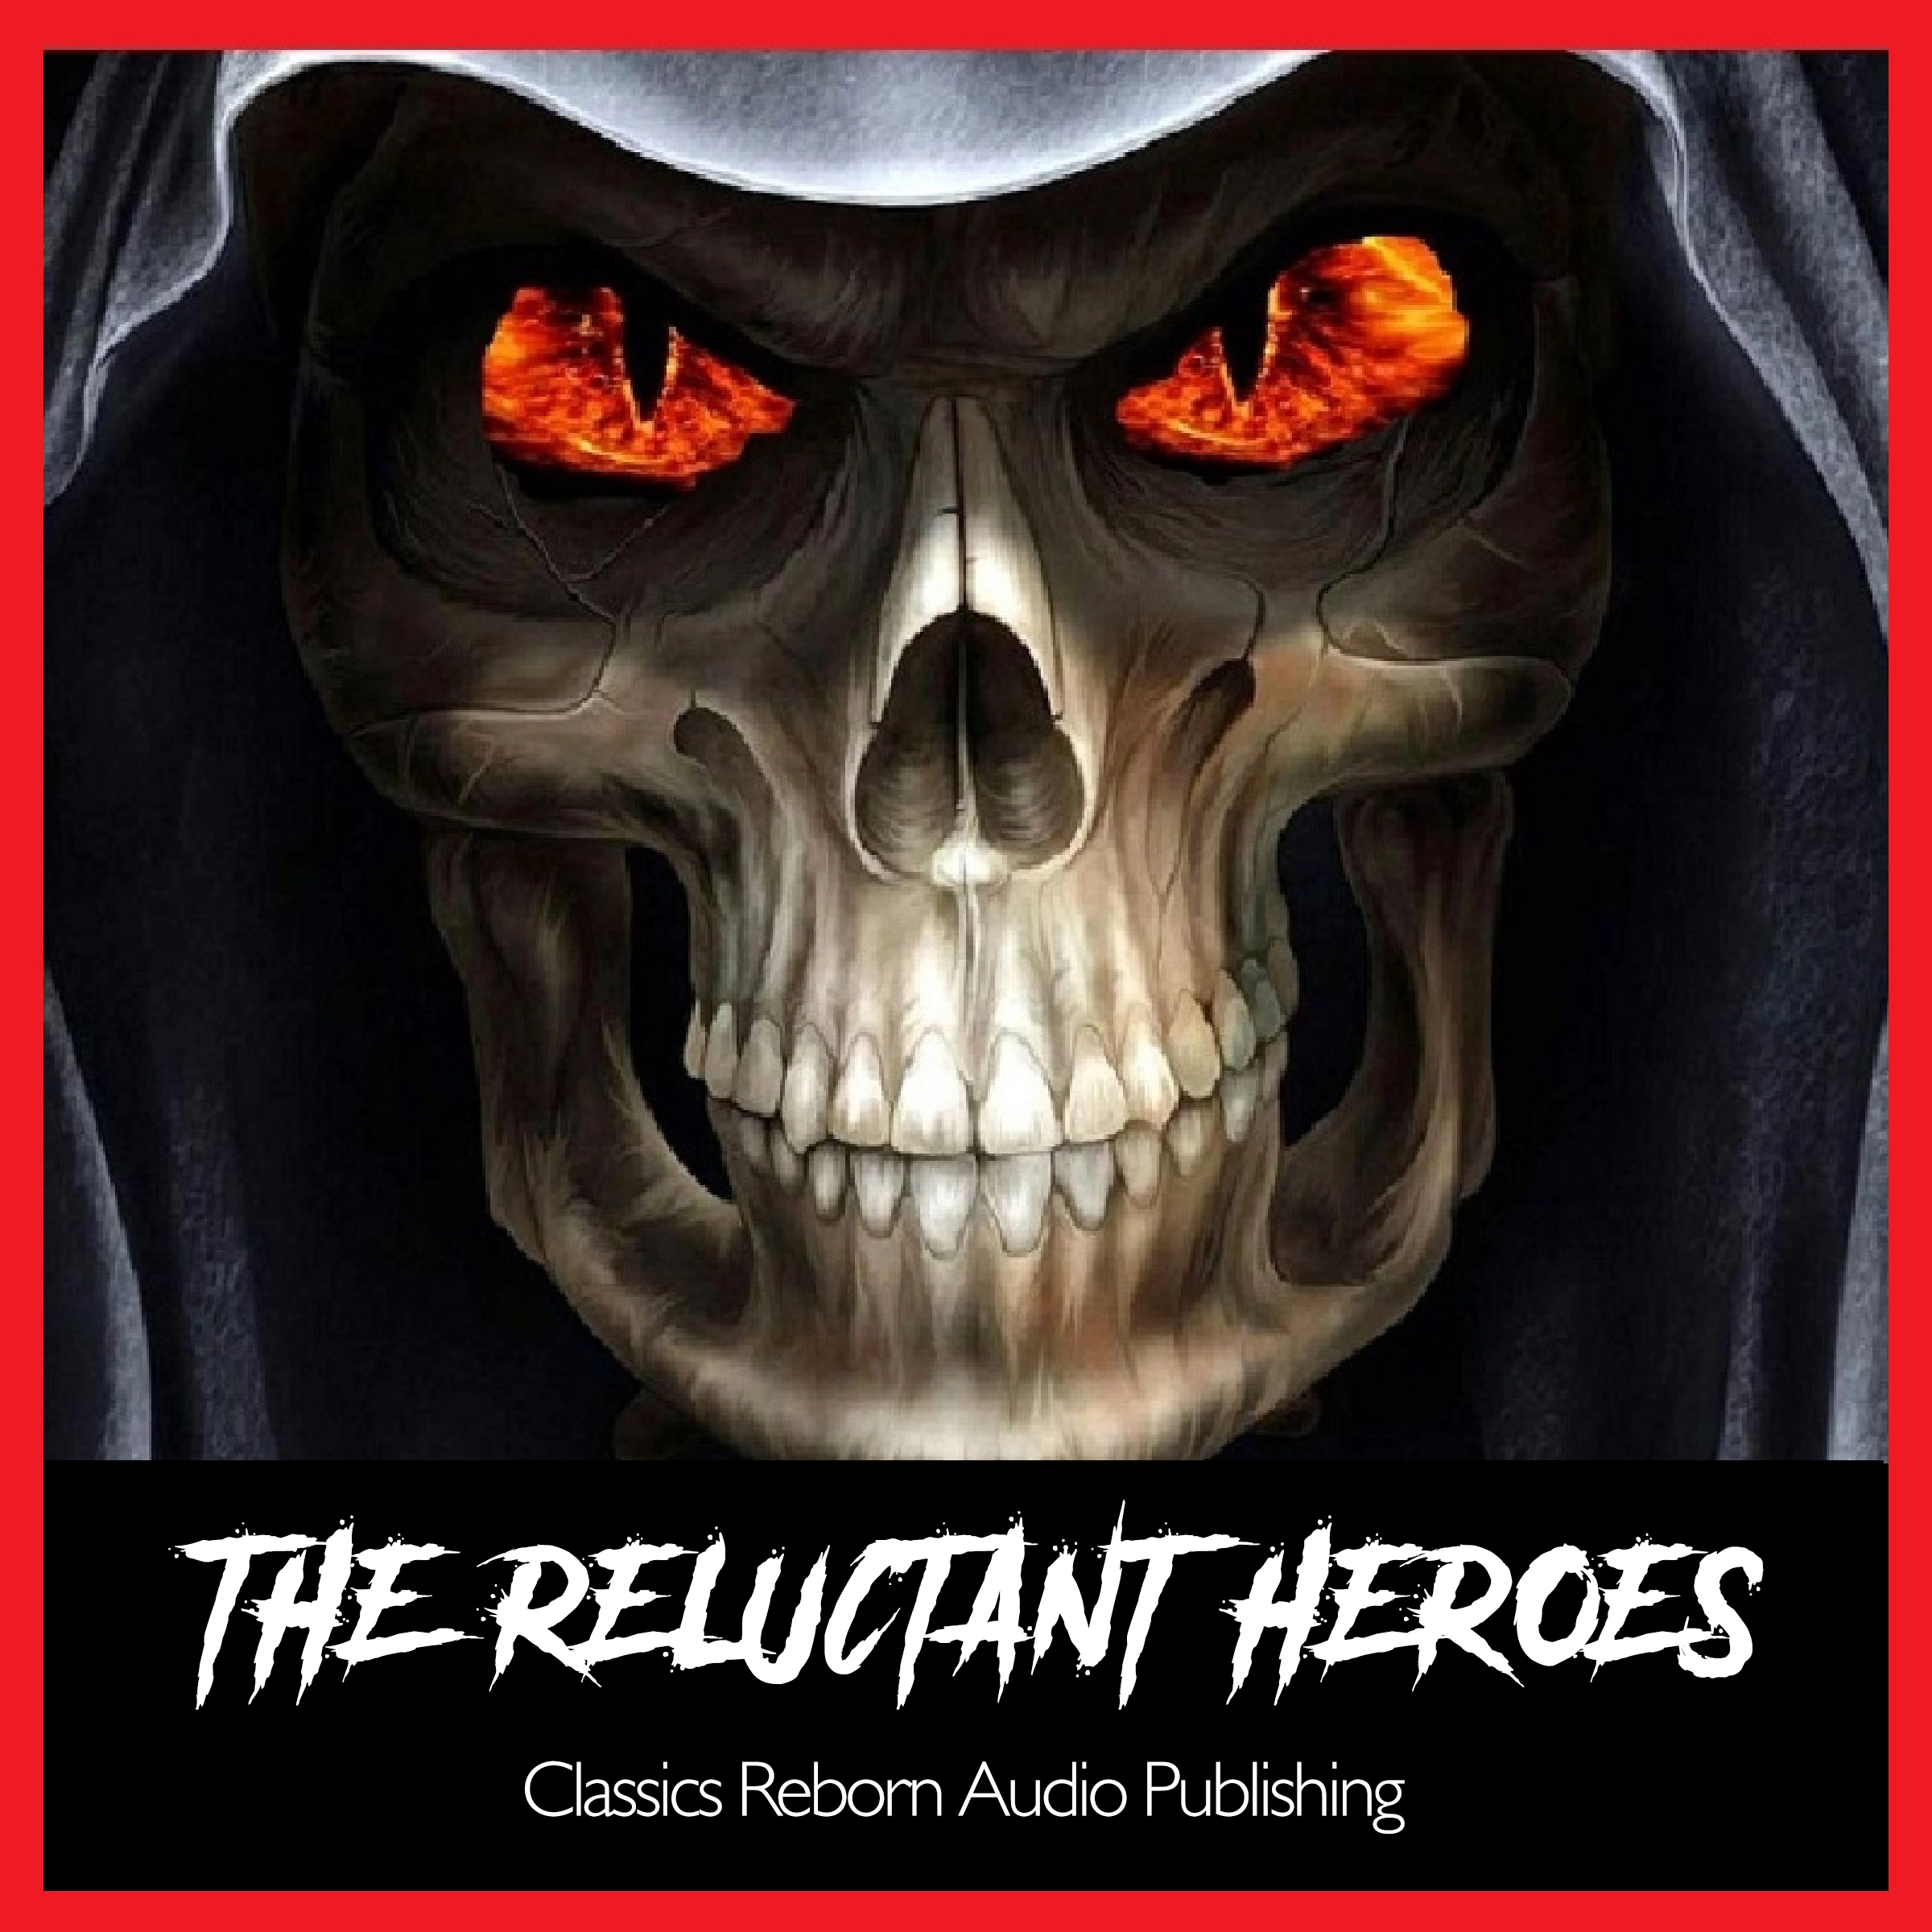 The Reluctant Heroes by Classics Reborn Audio Publishing Audiobook